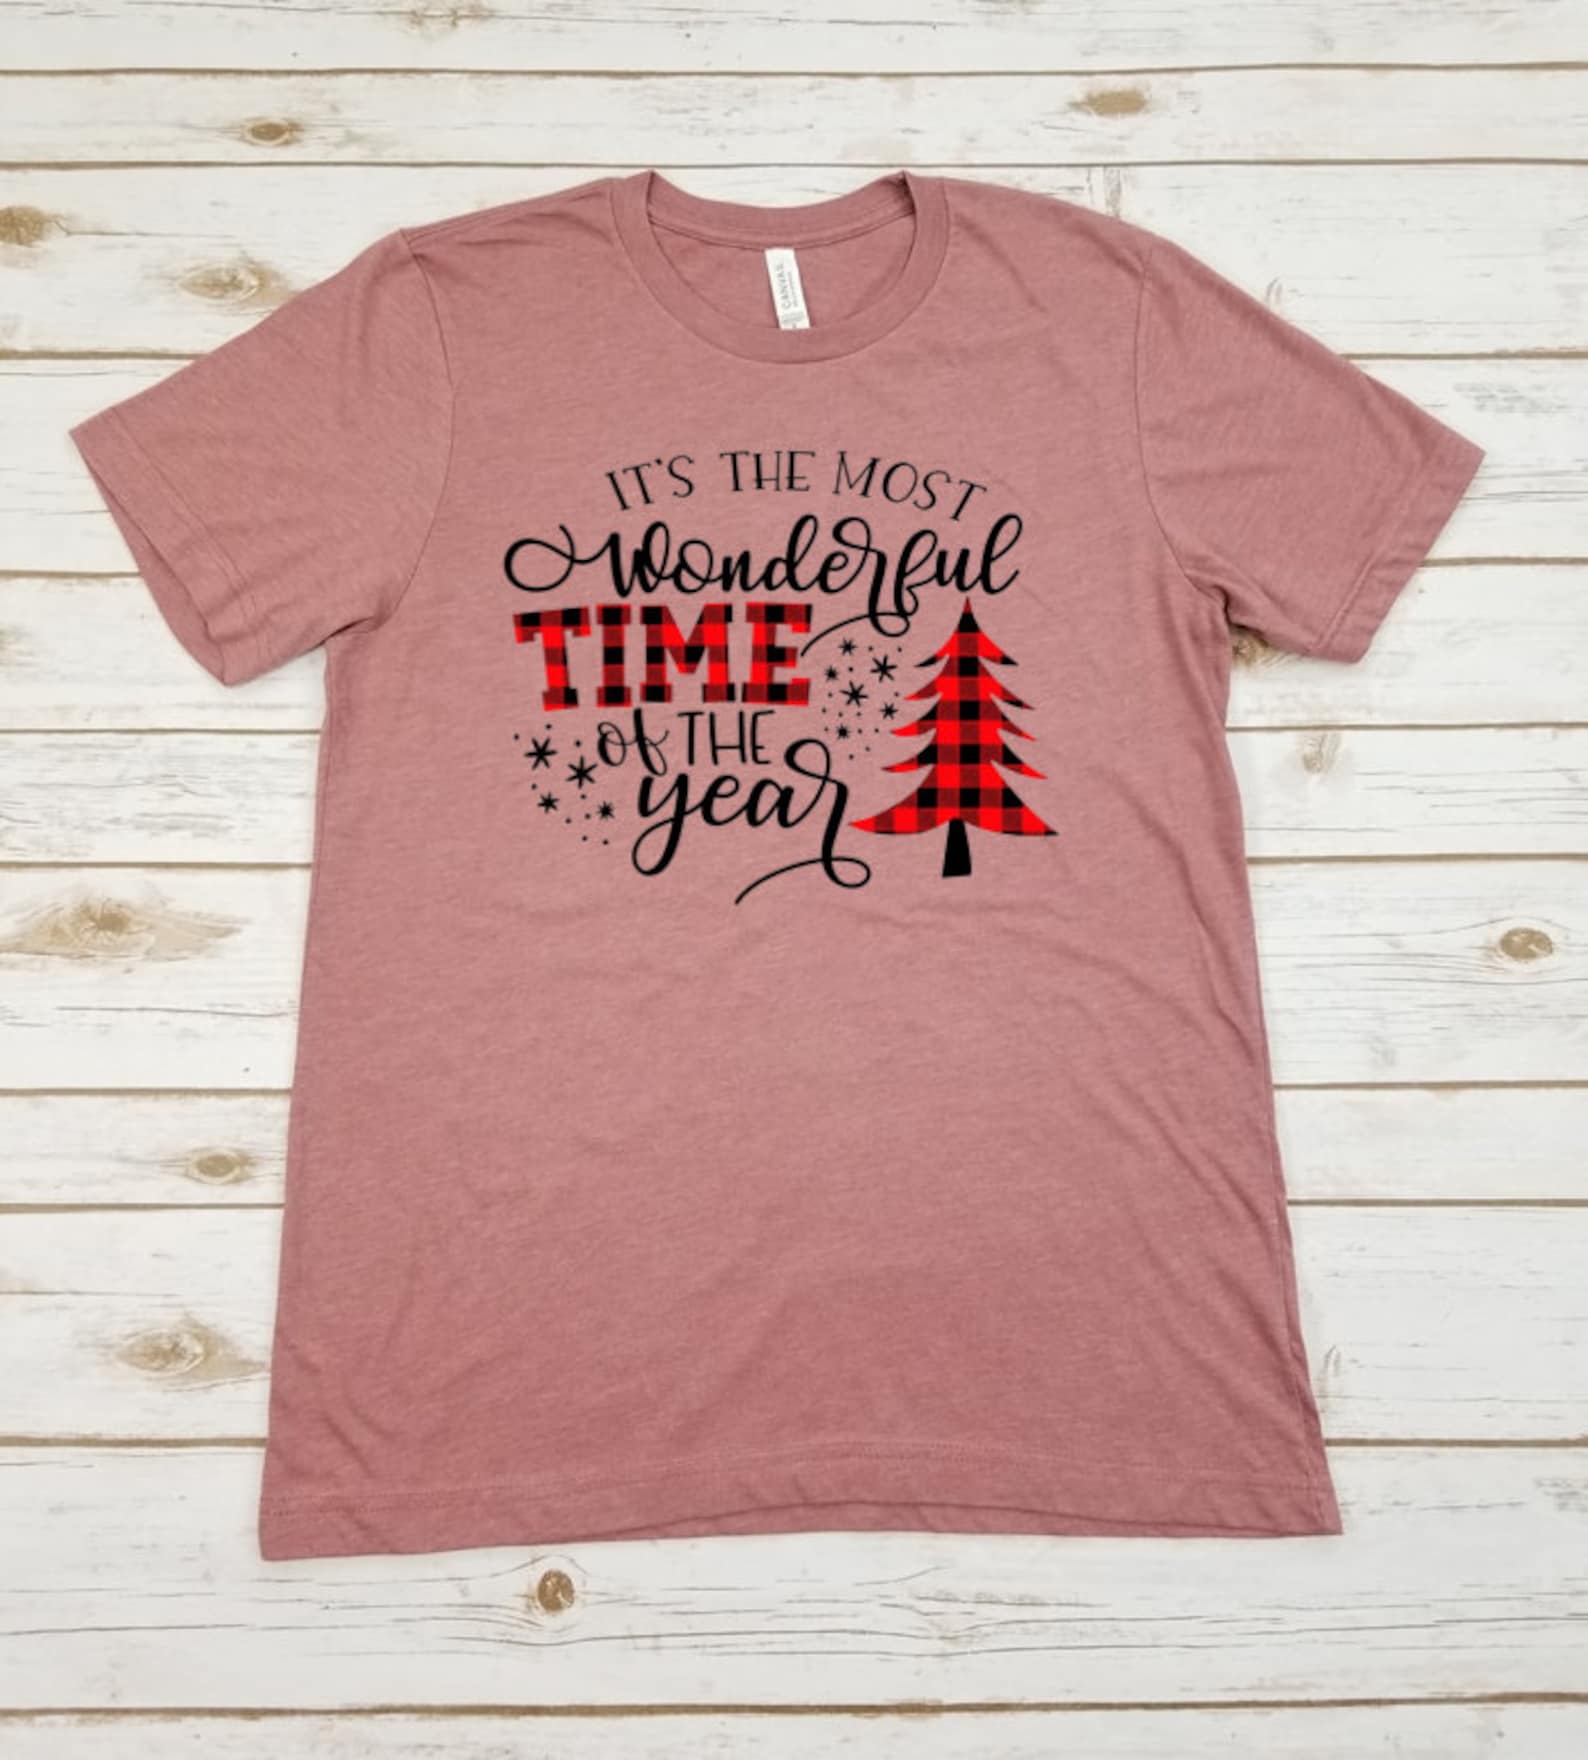 It's the most wonderful time of the year shirtChristmas | Etsy